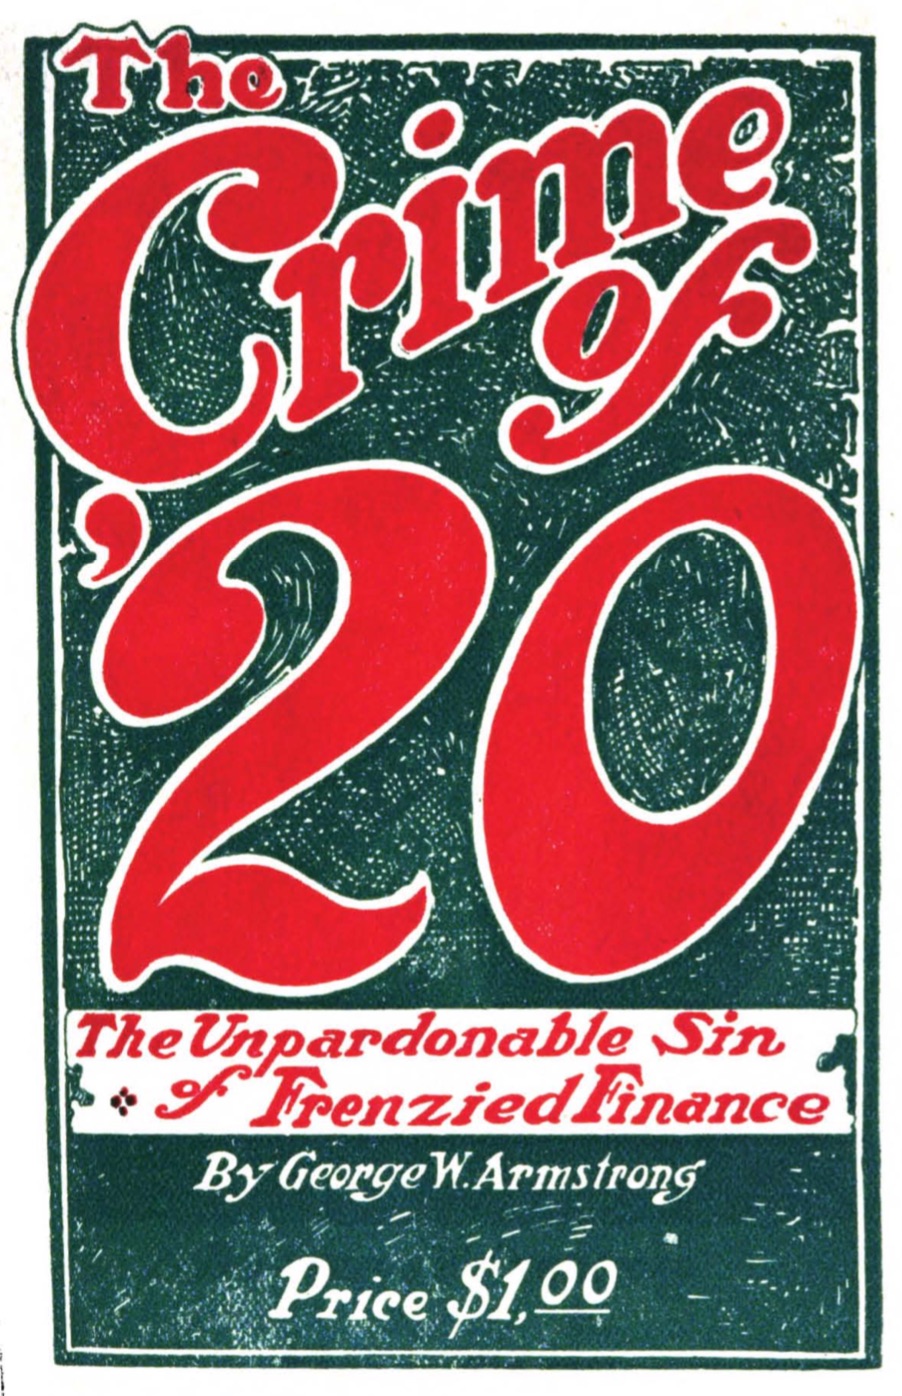 The Crime of 1920 - The Unpardonable Sin of Frenzied Finance (1922) by George Washington Armstrong